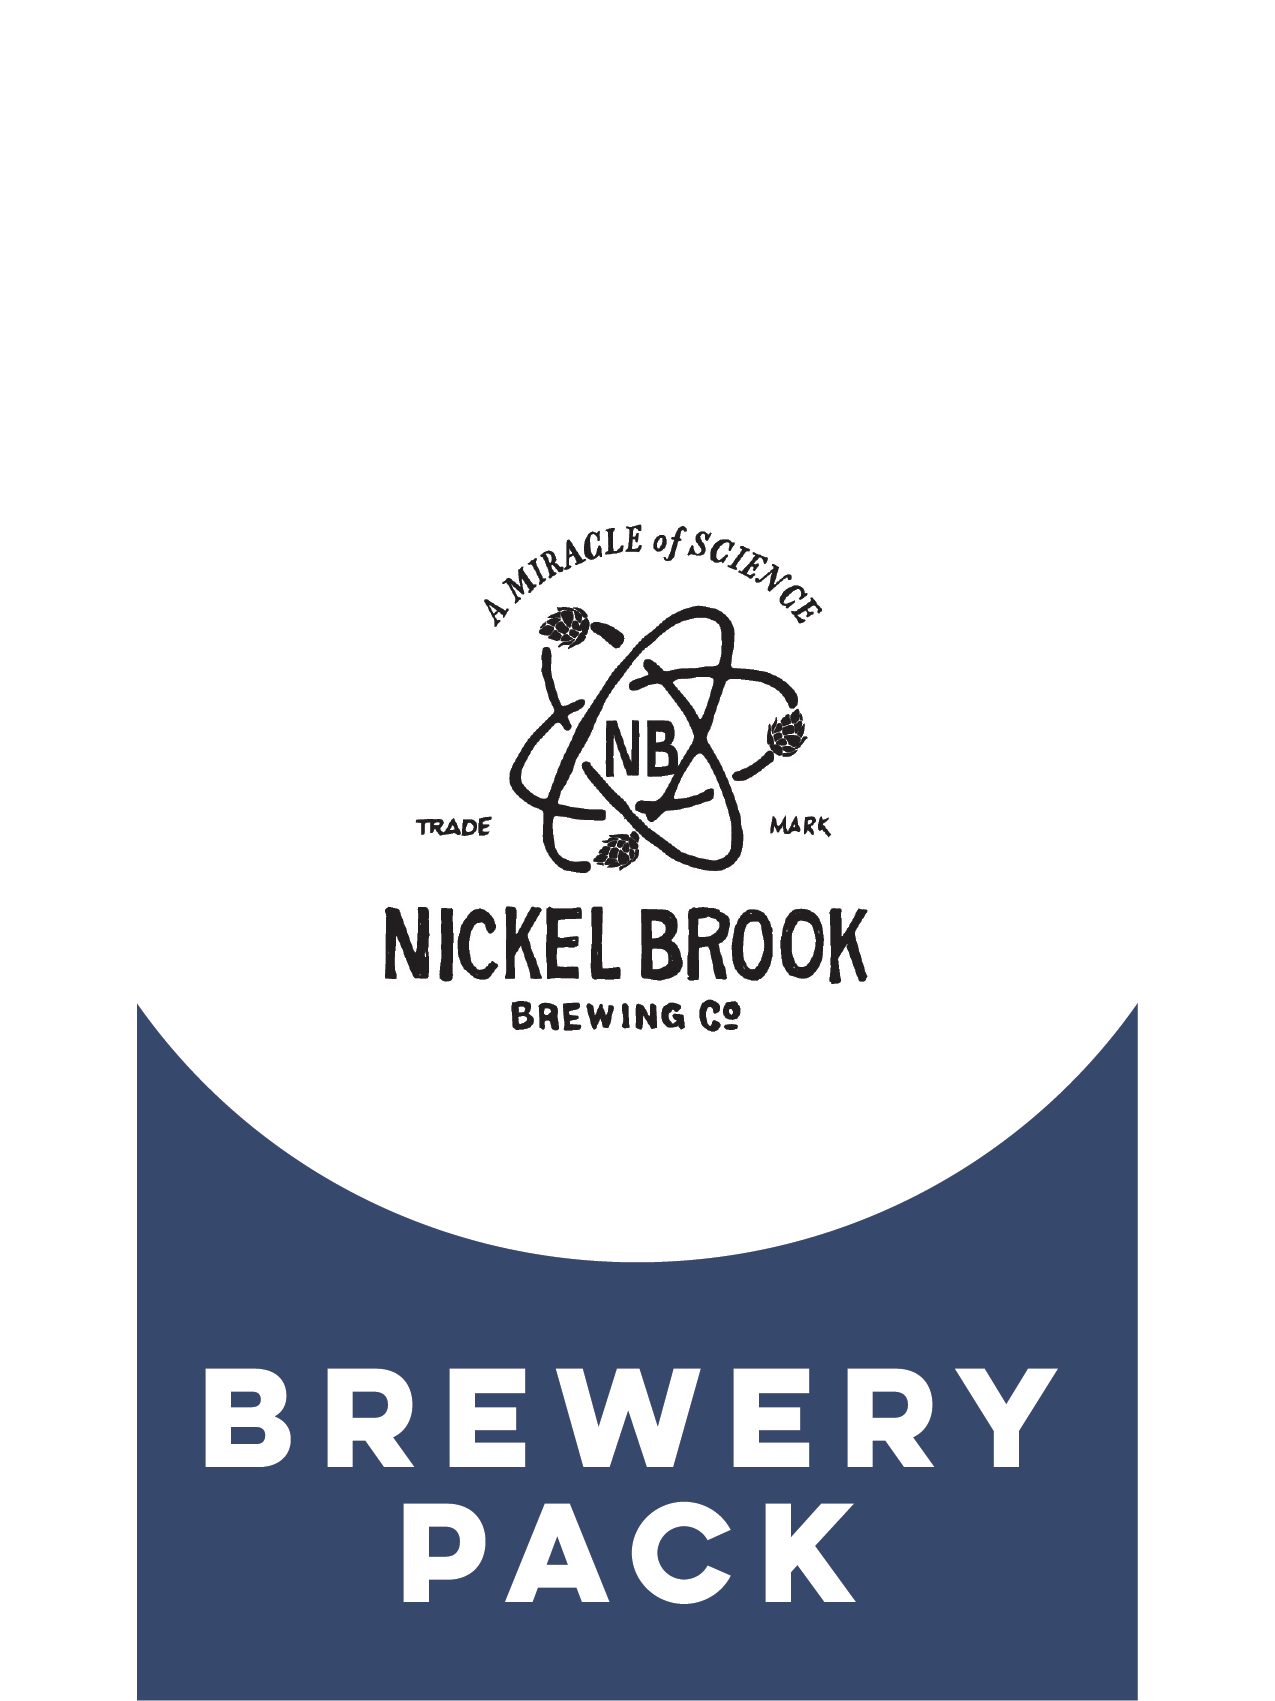 -Nickel Brook- Nickel Brook Brewery Pack-Packs & Cases- Only @ Beer Republic - The best online beer store for American & Canadian craft beer - Buy beer online from the USA and Canada - Bier online kopen - Amerikaans bier kopen - Craft beer store - Craft beer kopen - Amerikanisch bier kaufen - Bier online kaufen - Acheter biere online - IPA - Stout - Porter - New England IPA - Hazy IPA - Imperial Stout - Barrel Aged - Barrel Aged Imperial Stout - Brown - Dark beer - Blond - Blonde - Pilsner - Lager - Wheat -